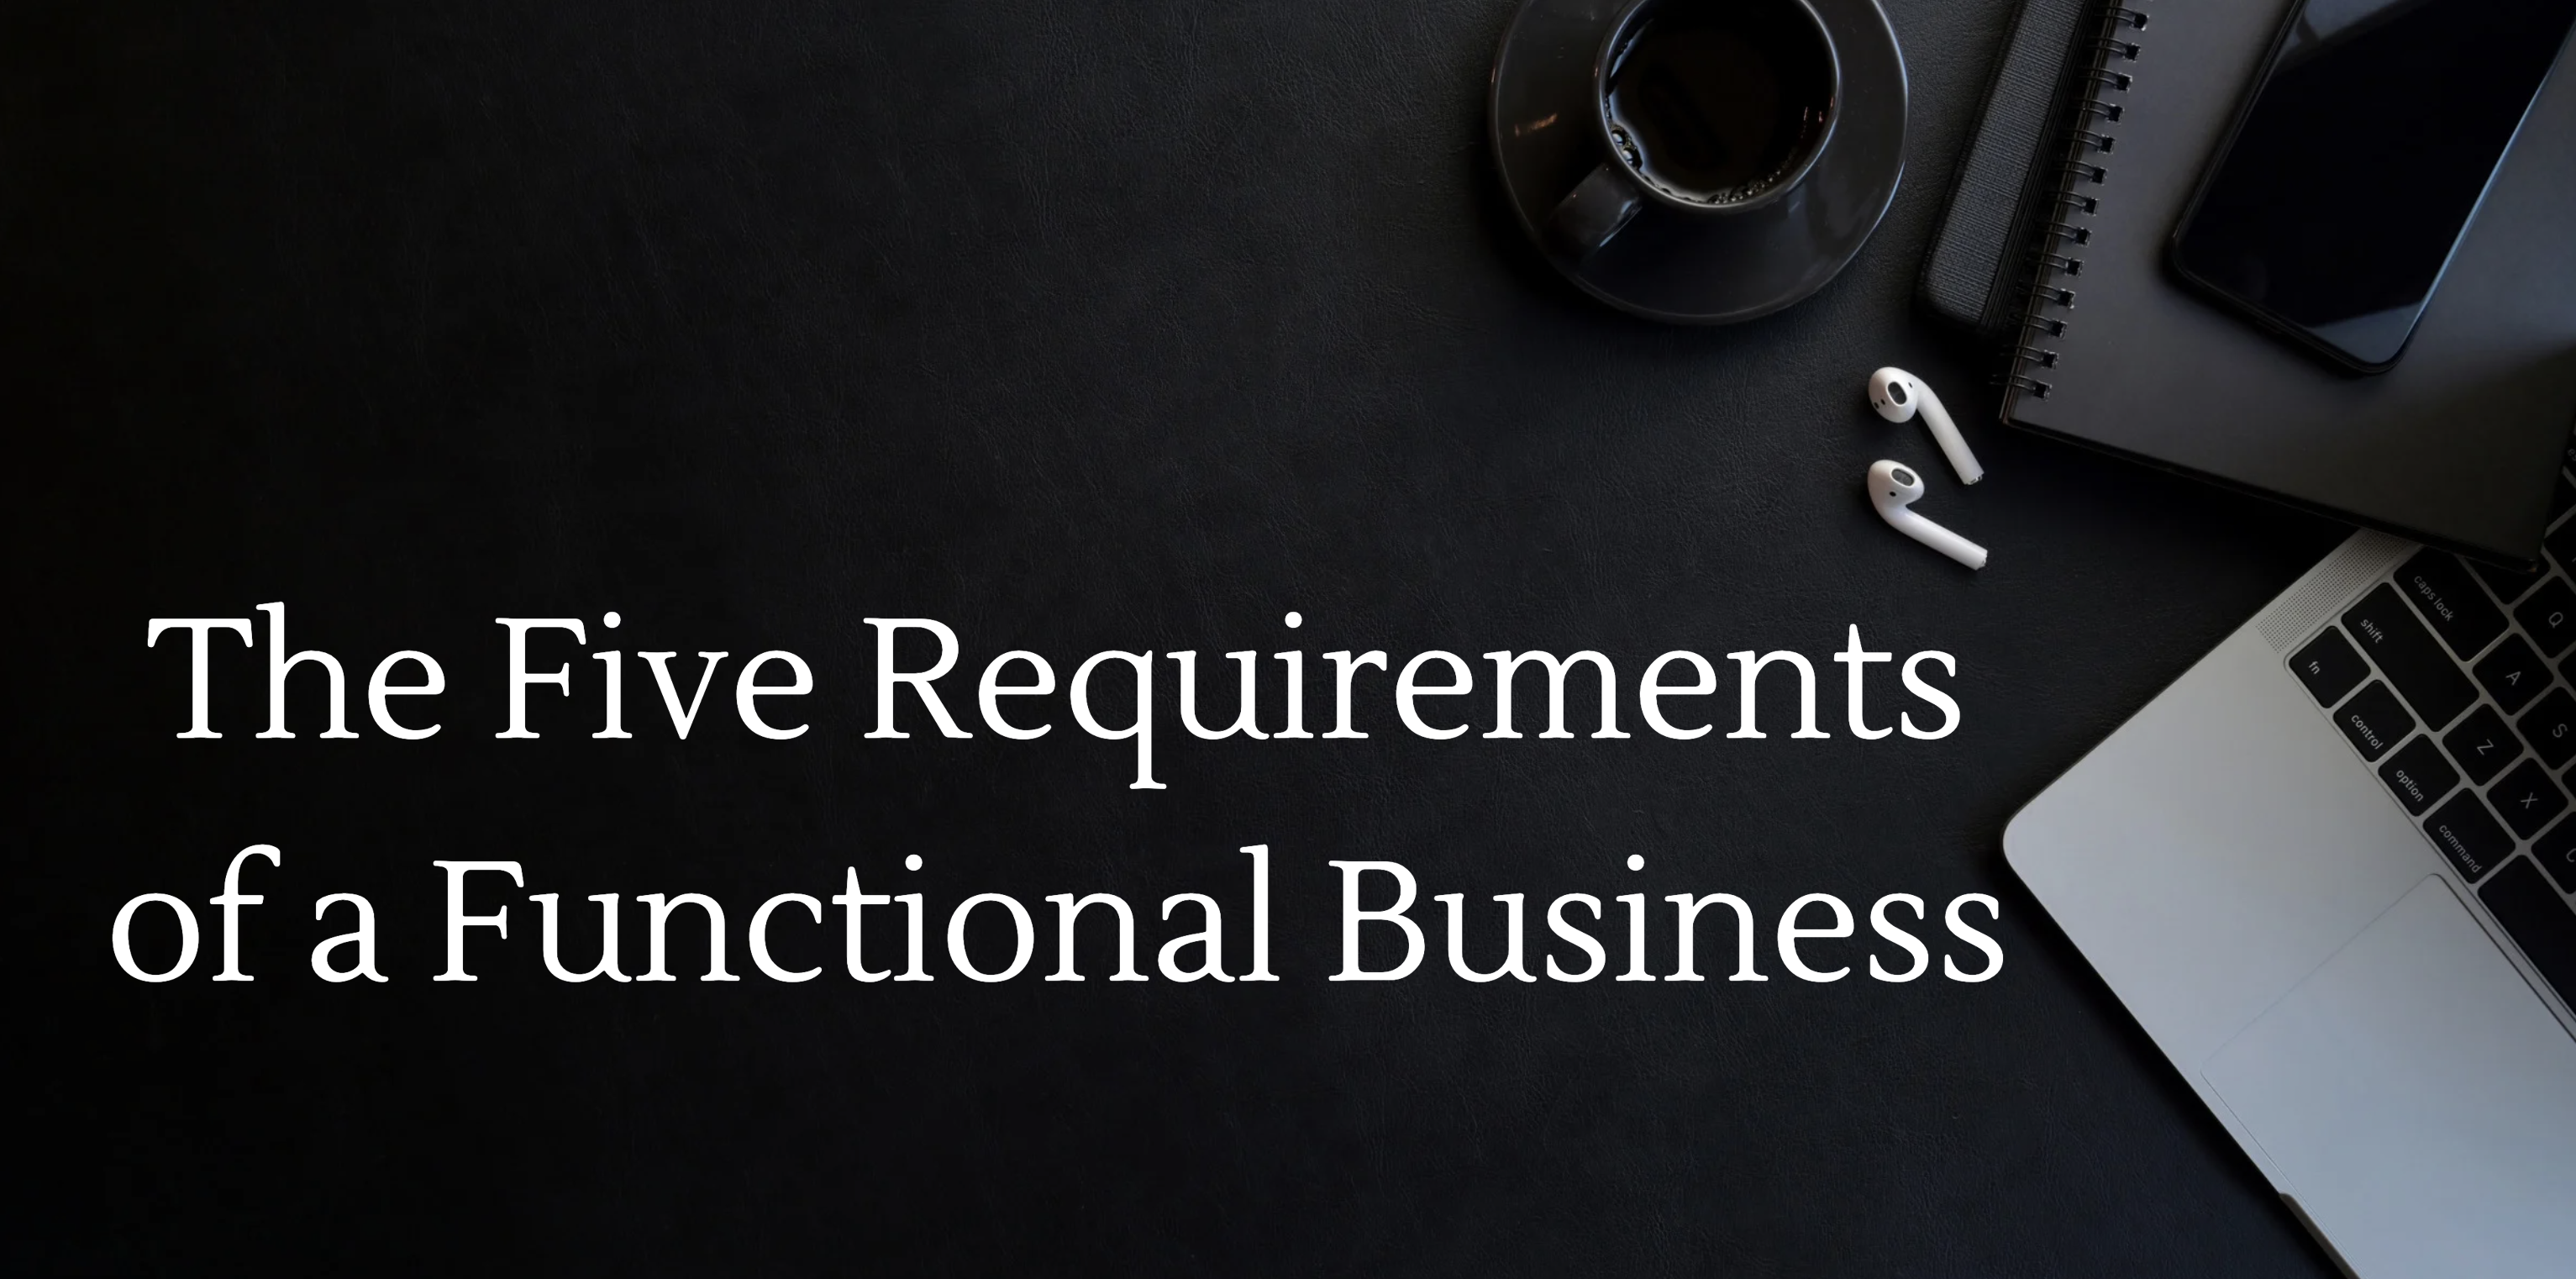 The Five Requirements of a Functional Business